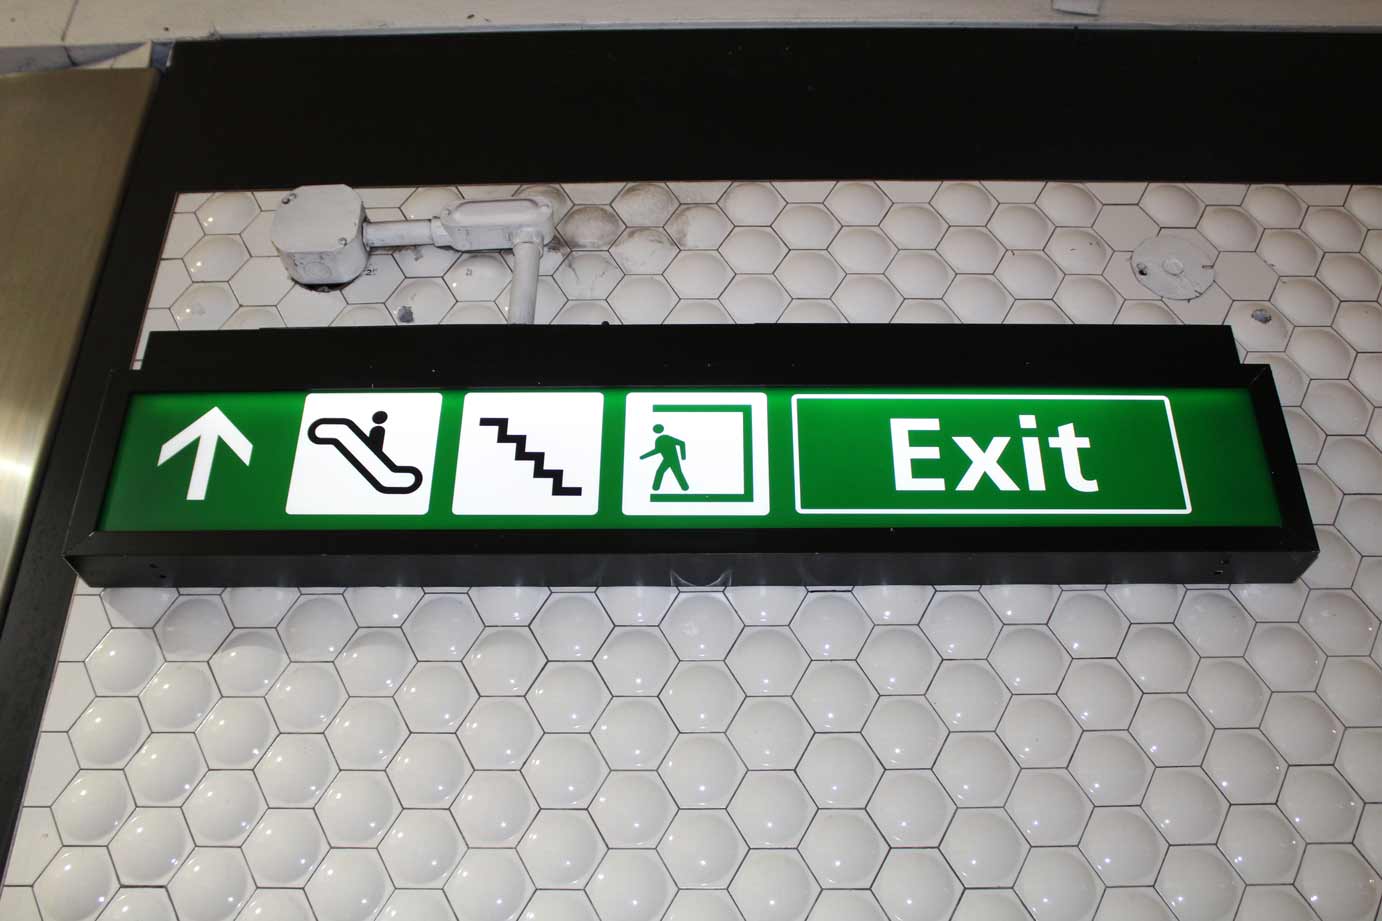 enter-exit-signs-by-prosource-signs-derry-londonderry-salem-manchester-nh